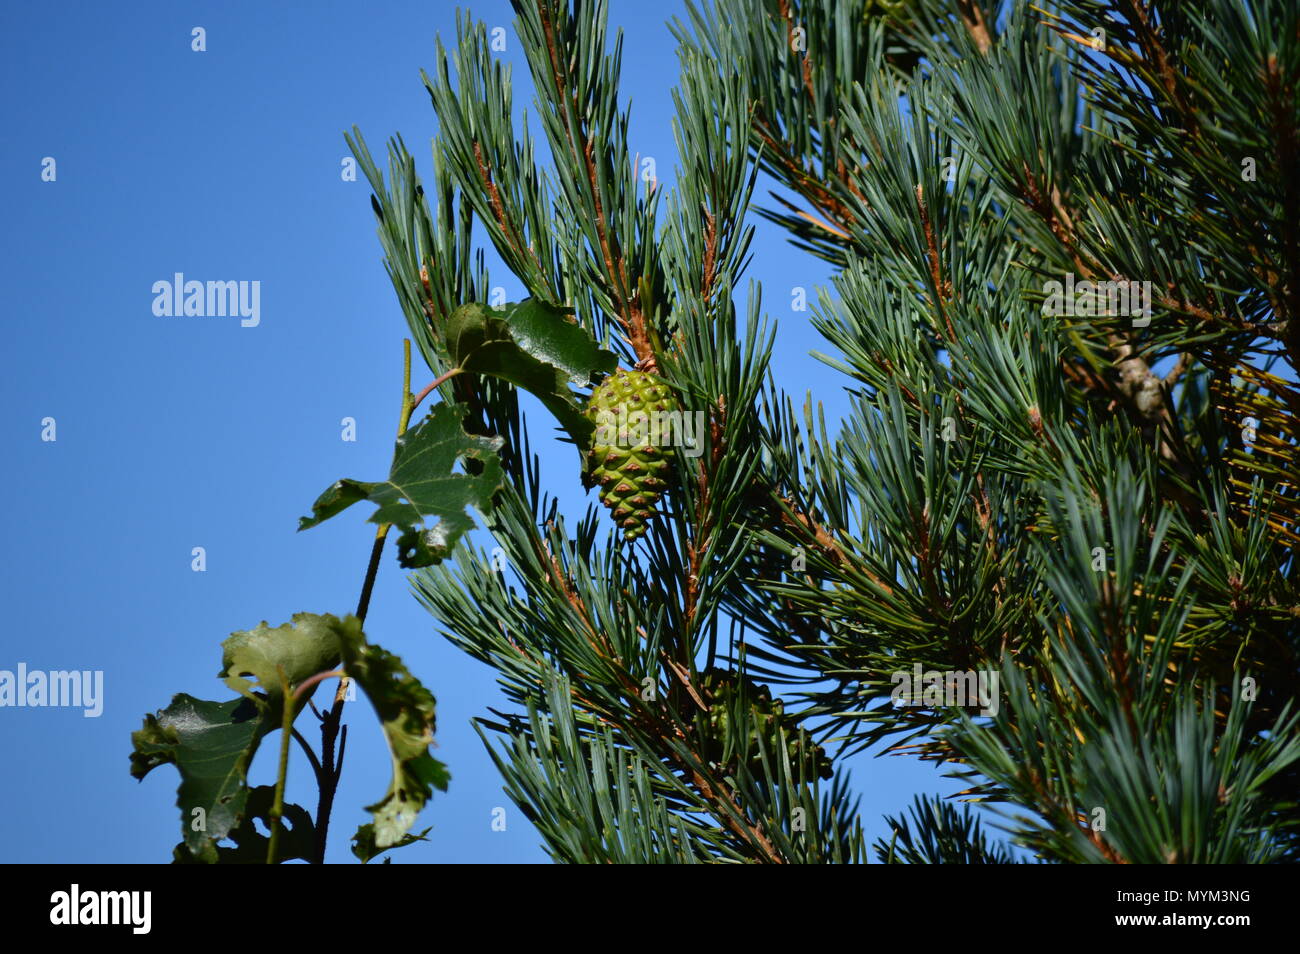 Beautiful Pinecone Hanging From The Branches Of A Pine In Rebedul Meadows In Lugo. Flowers Landscapes Nature. August 18, 2016. Rebedul Becerrea Lugo G Stock Photo